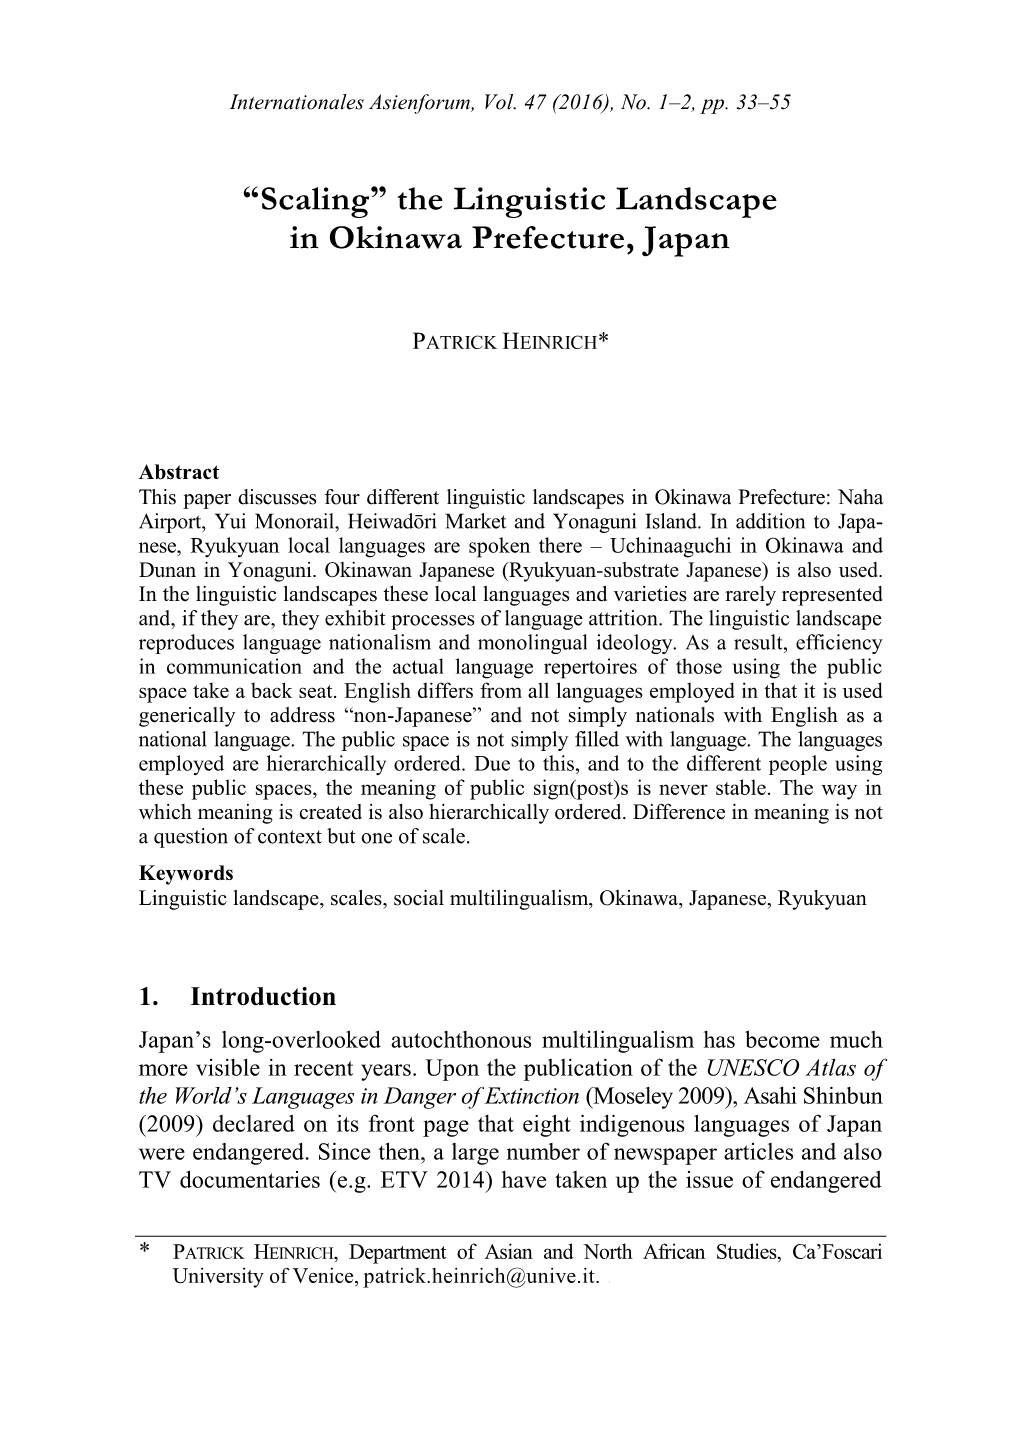 “Scaling” the Linguistic Landscape in Okinawa Prefecture, Japan